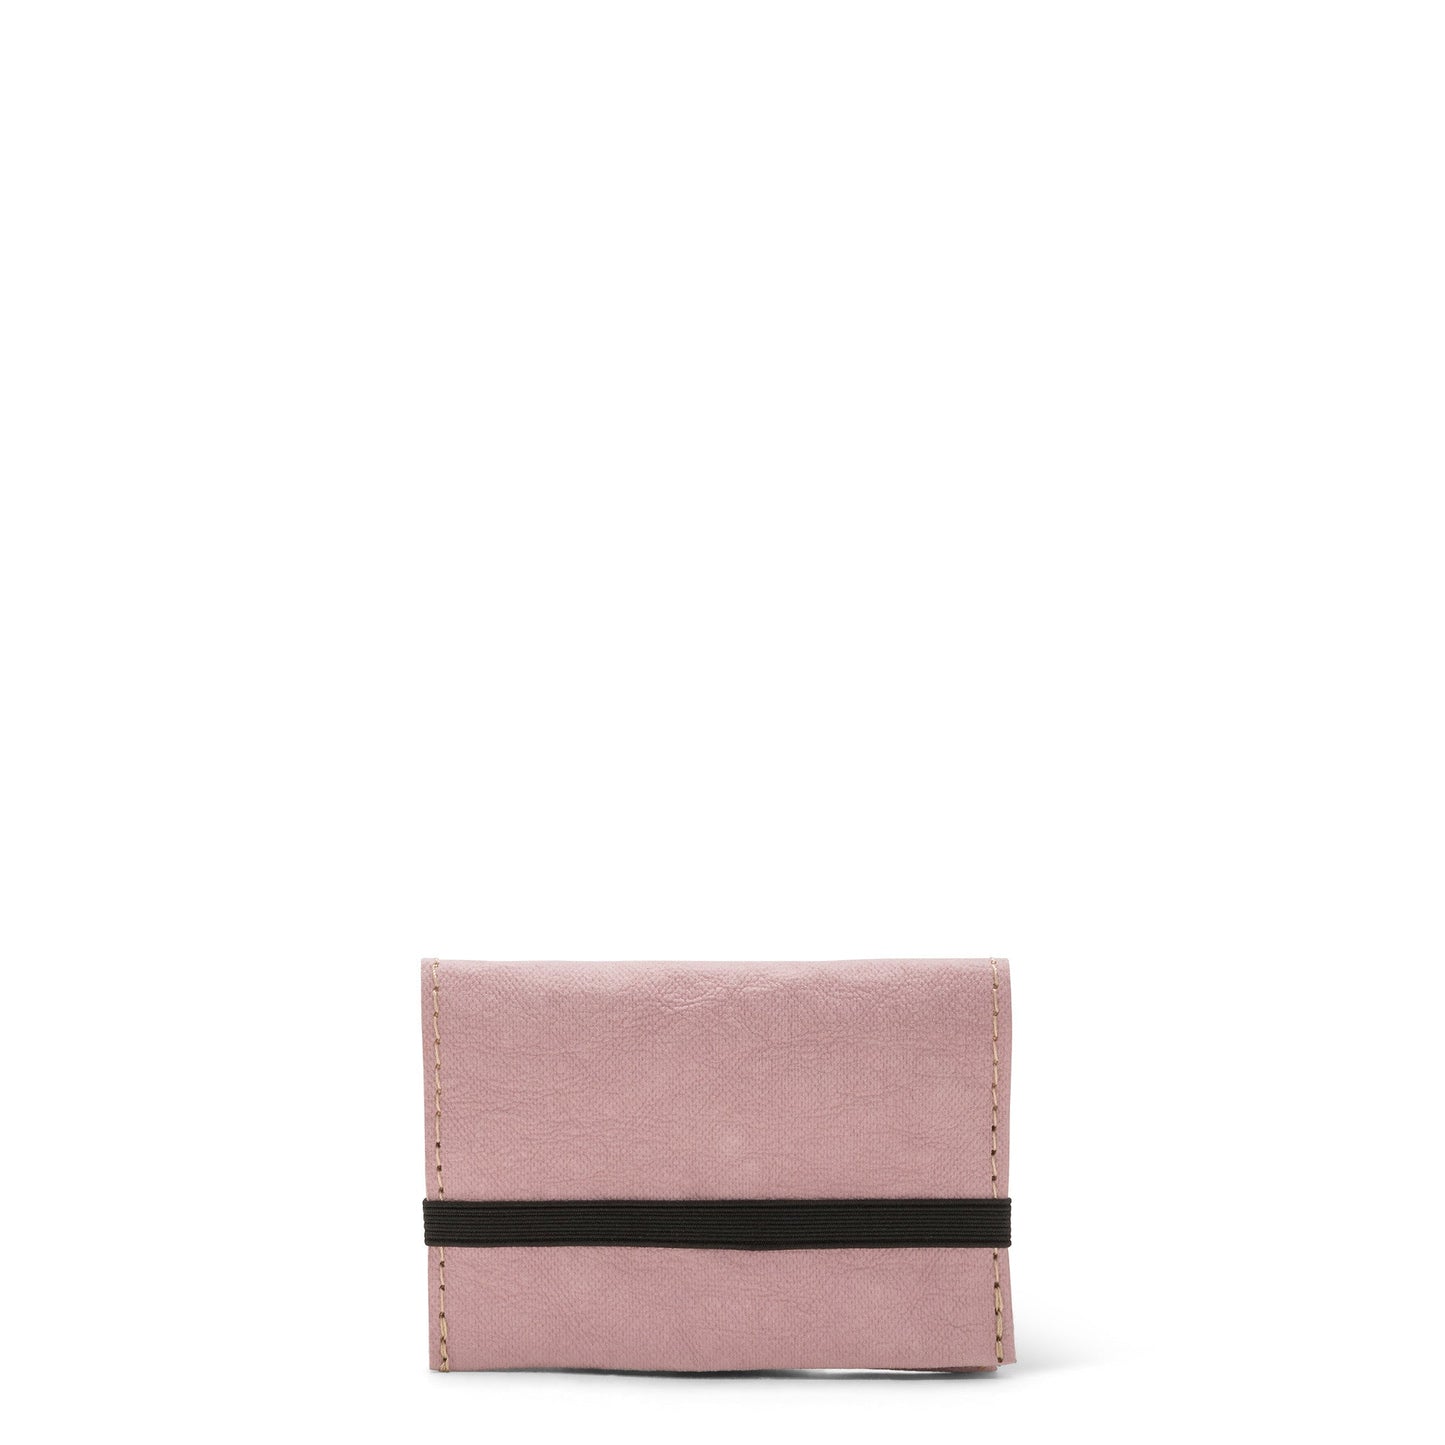 A dusky pink washable paper card holder is shown from the front, with an elastic strap closure in black.